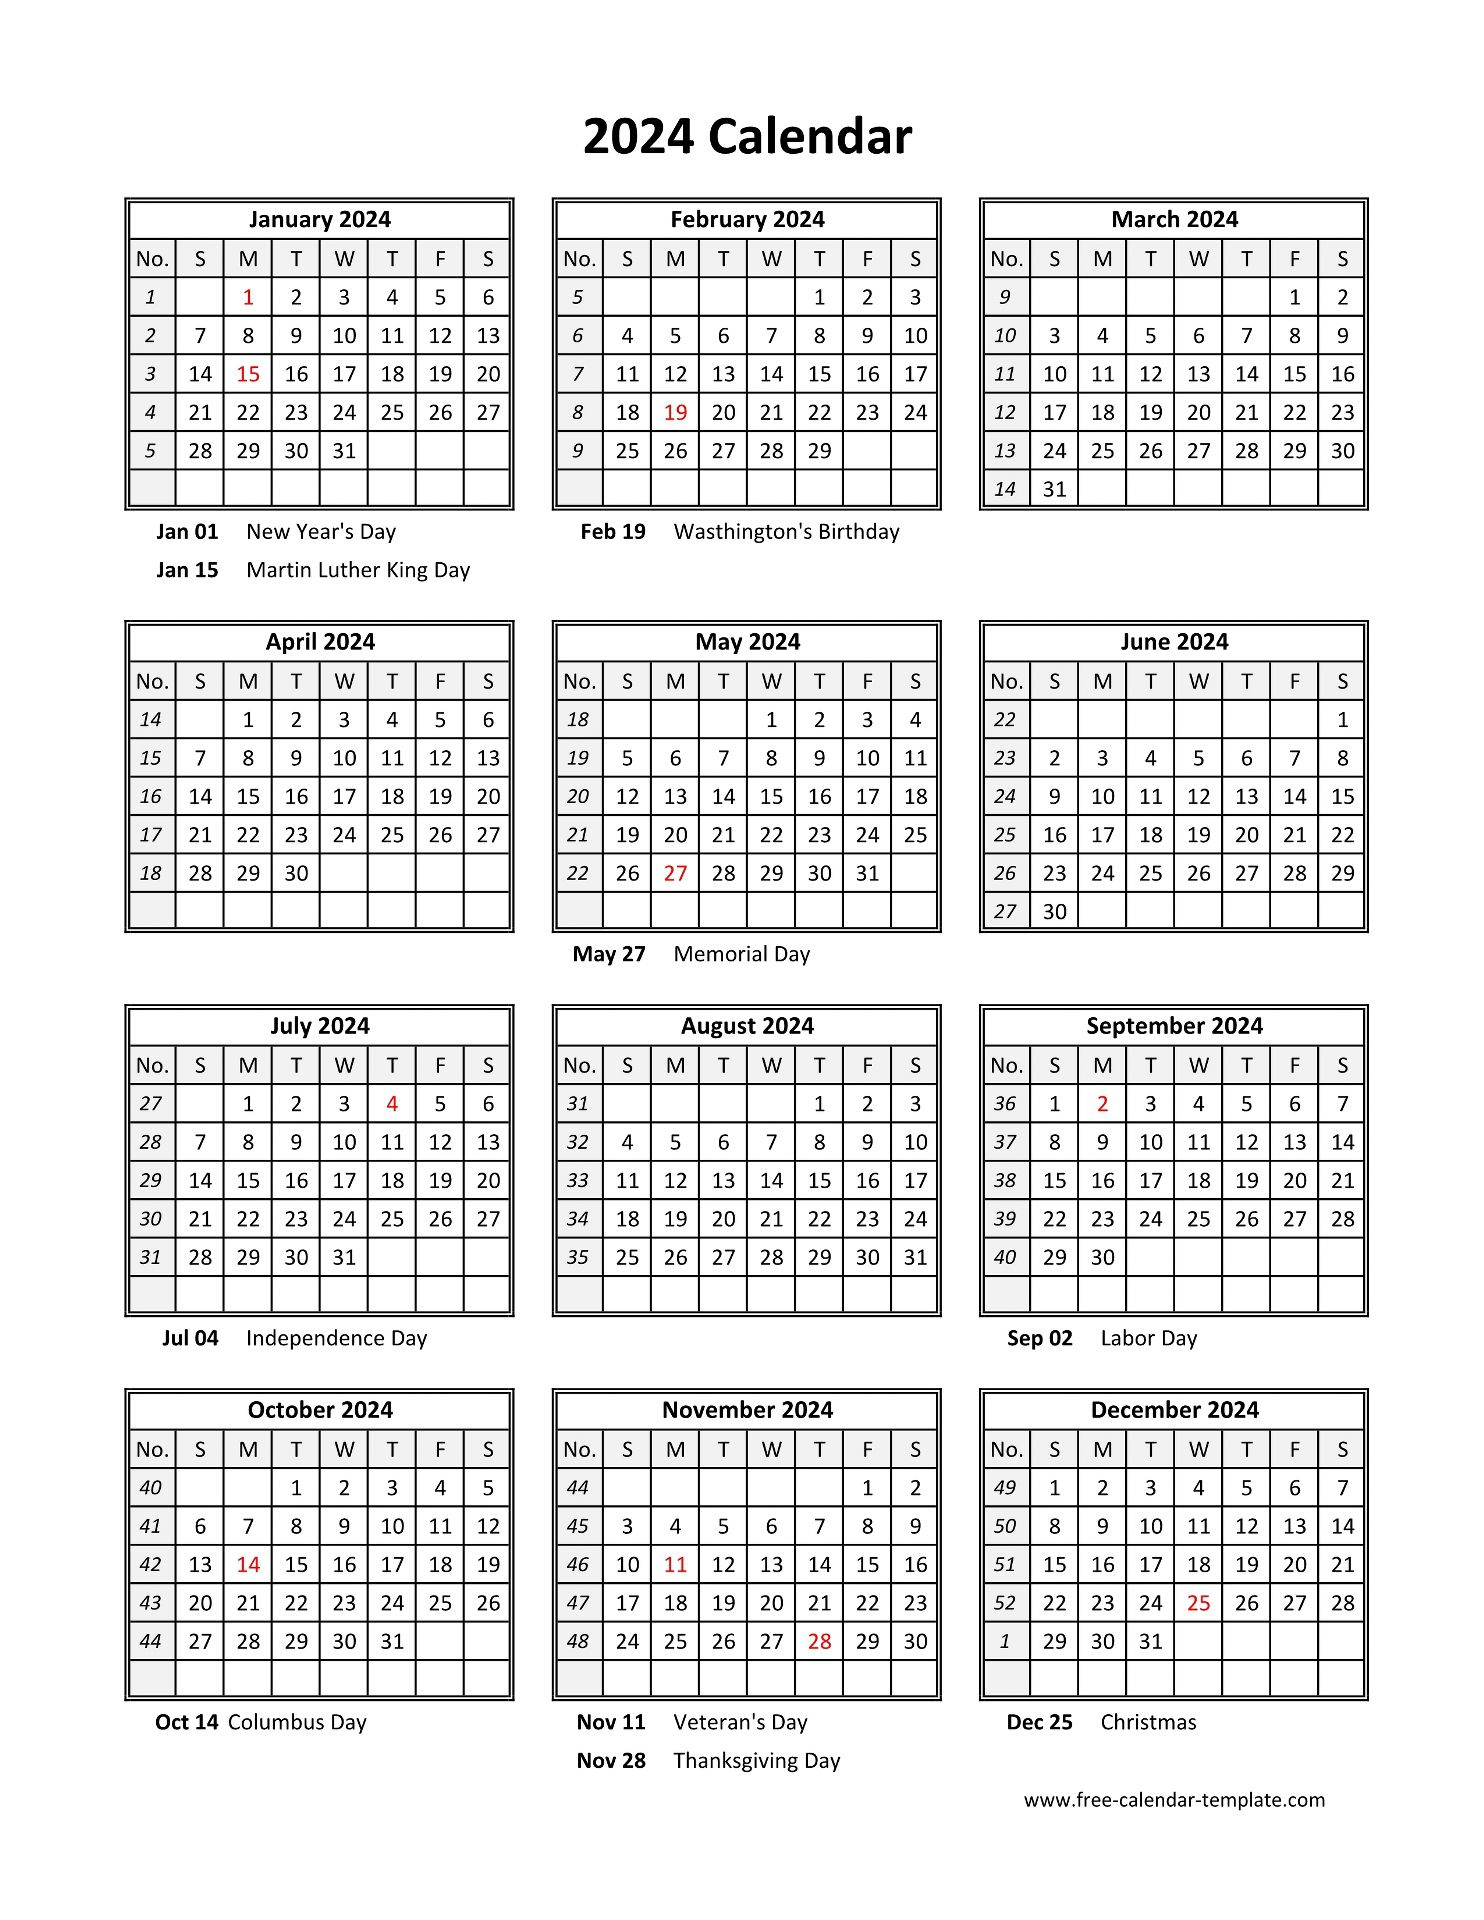 Yearly Printable Calendar 2024 With Holidays | Free-Calendar | Free Printable Calendar 2024 Pdf Download